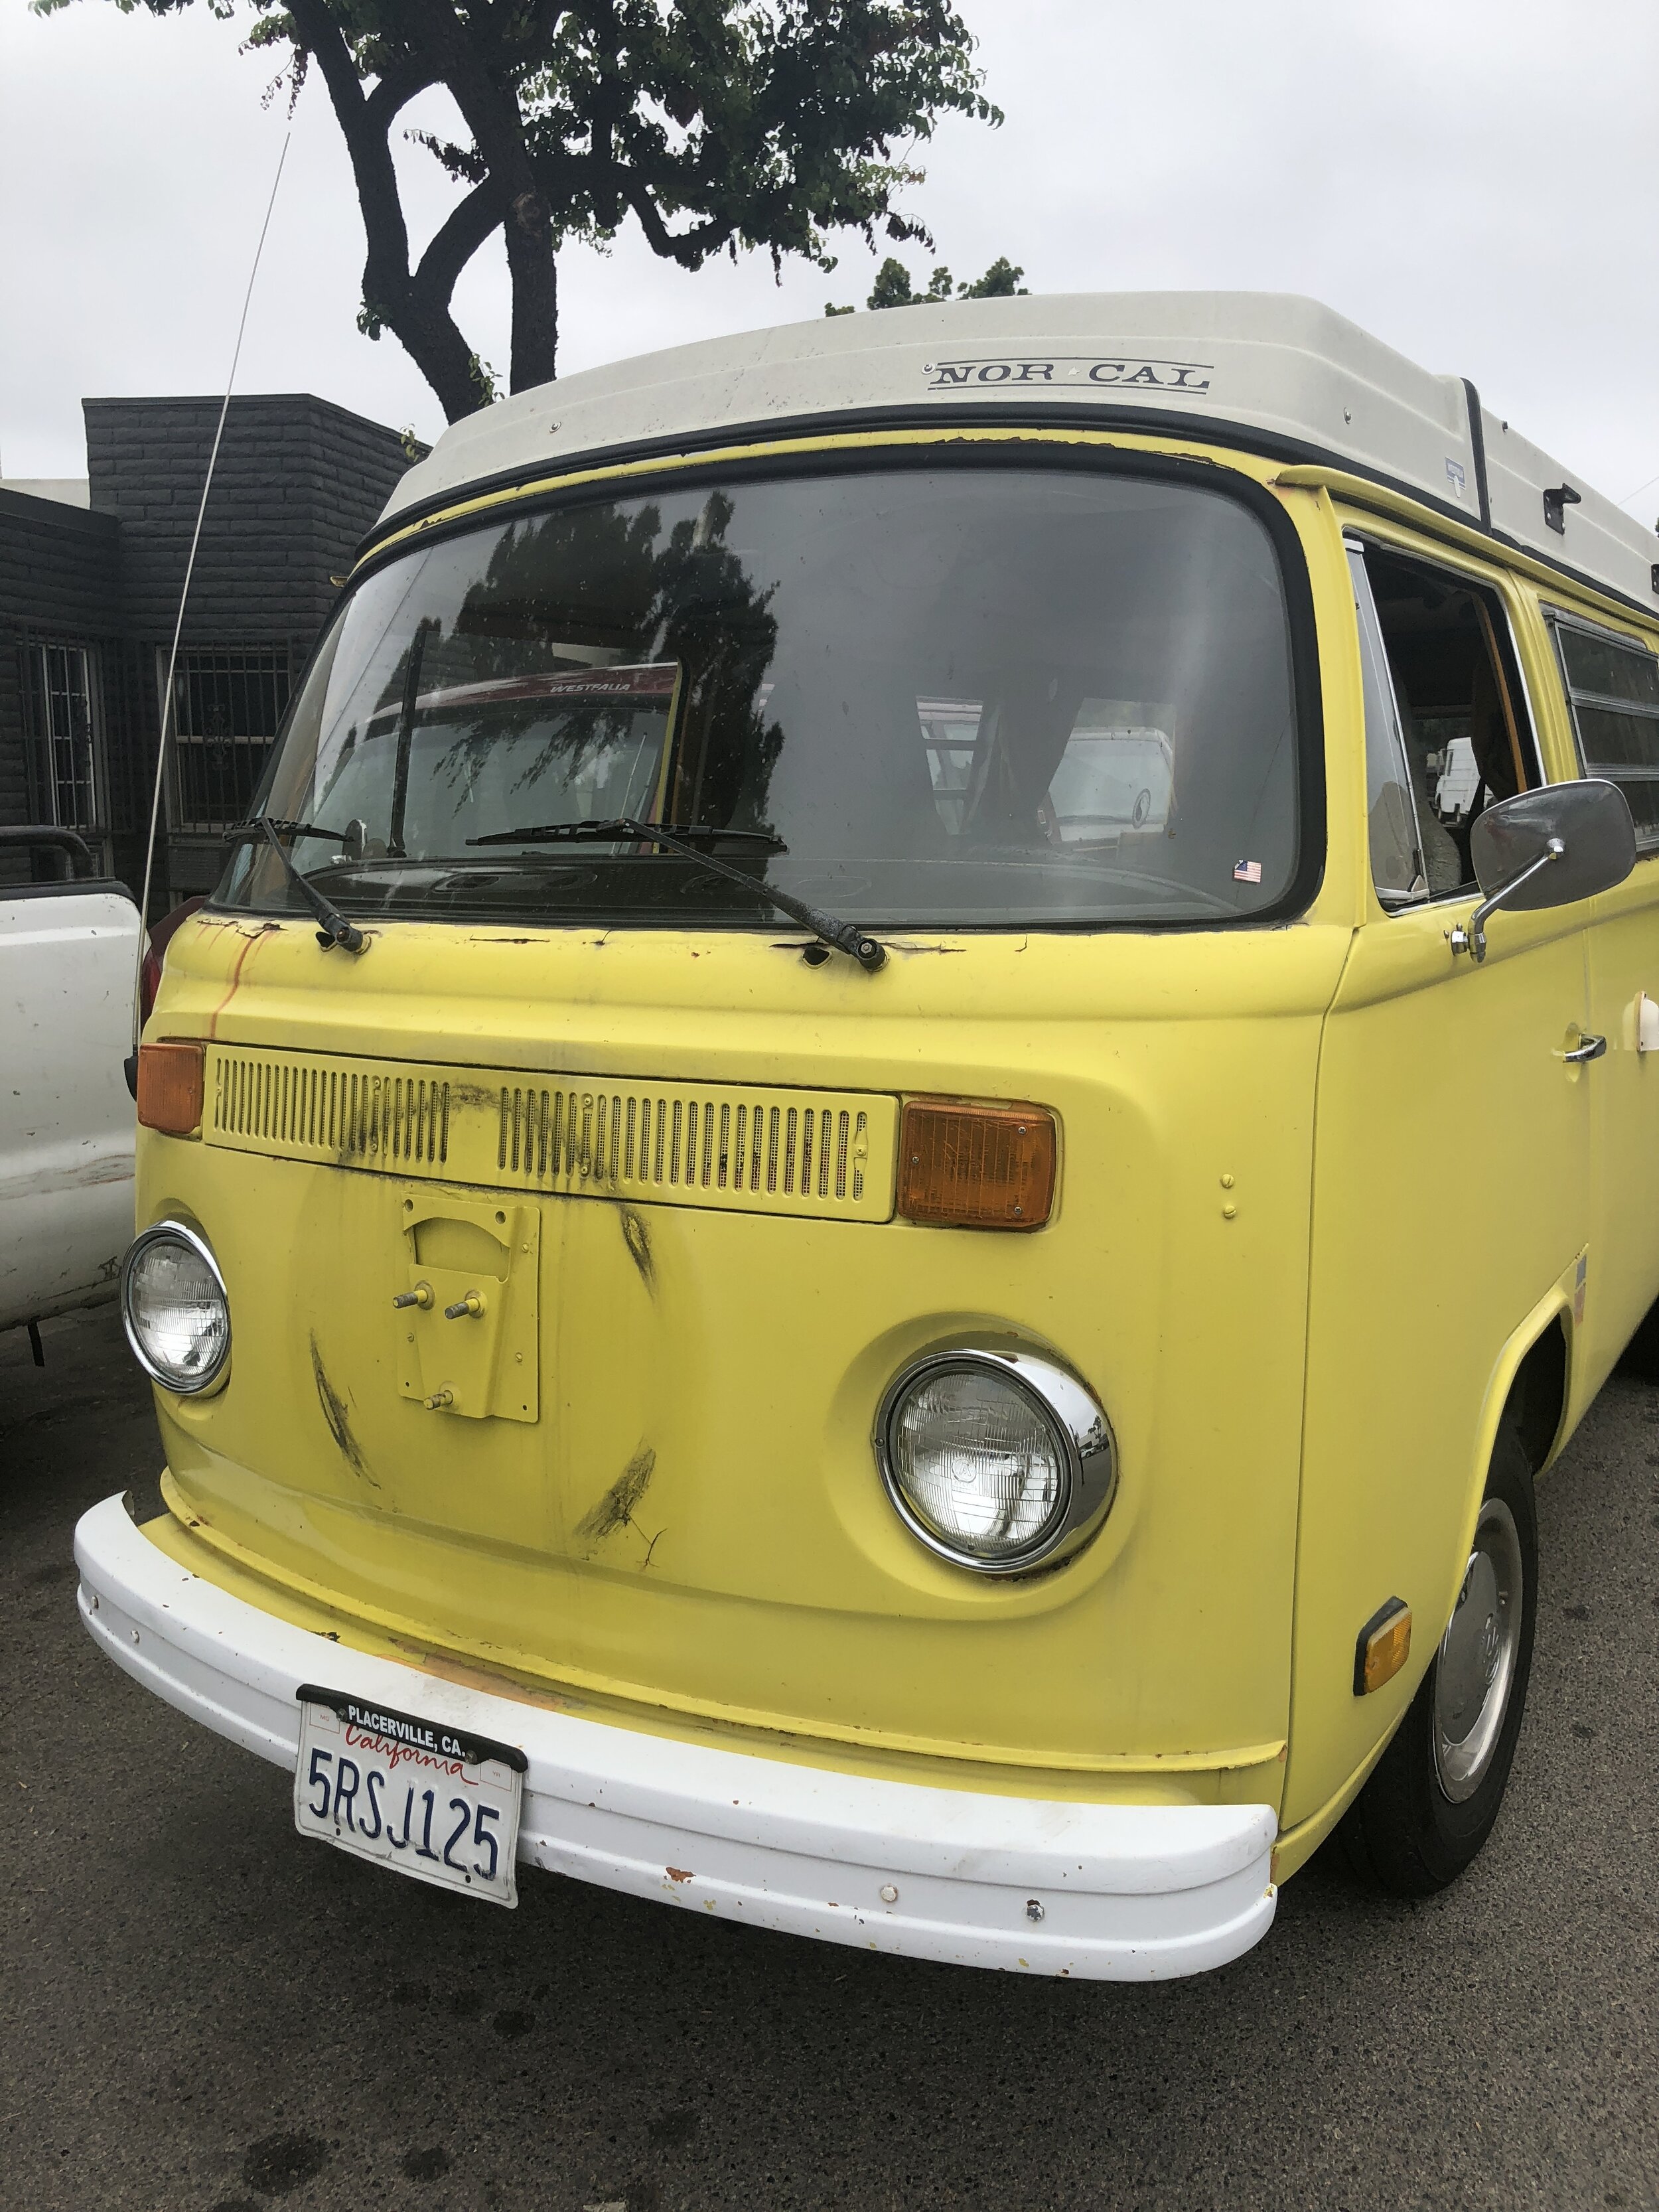  This bus was an internet purchase by a client in Minnesota. This is how the bus looked when it arrived at Vintage Surfari Wagons in Costa Mesa. 